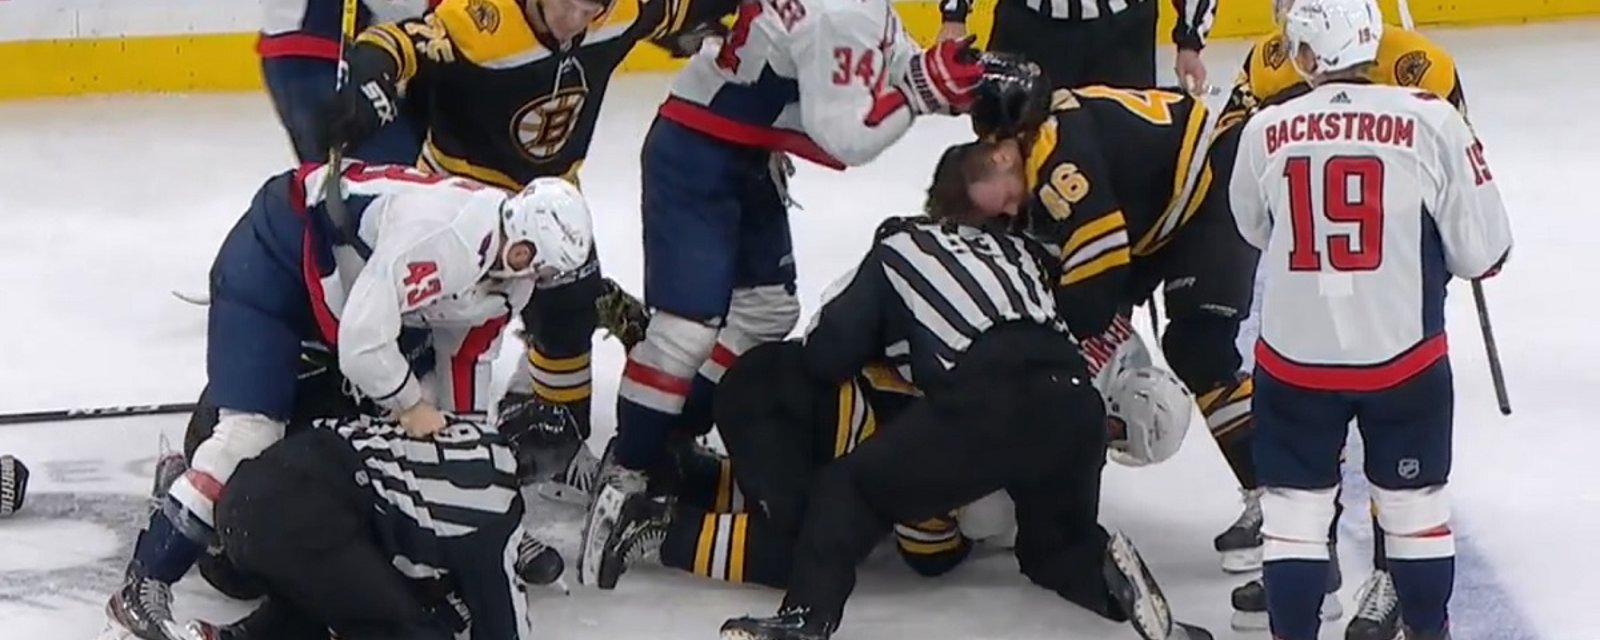 David Pastrnak goes after Tom Wilson and all hell breaks loose!